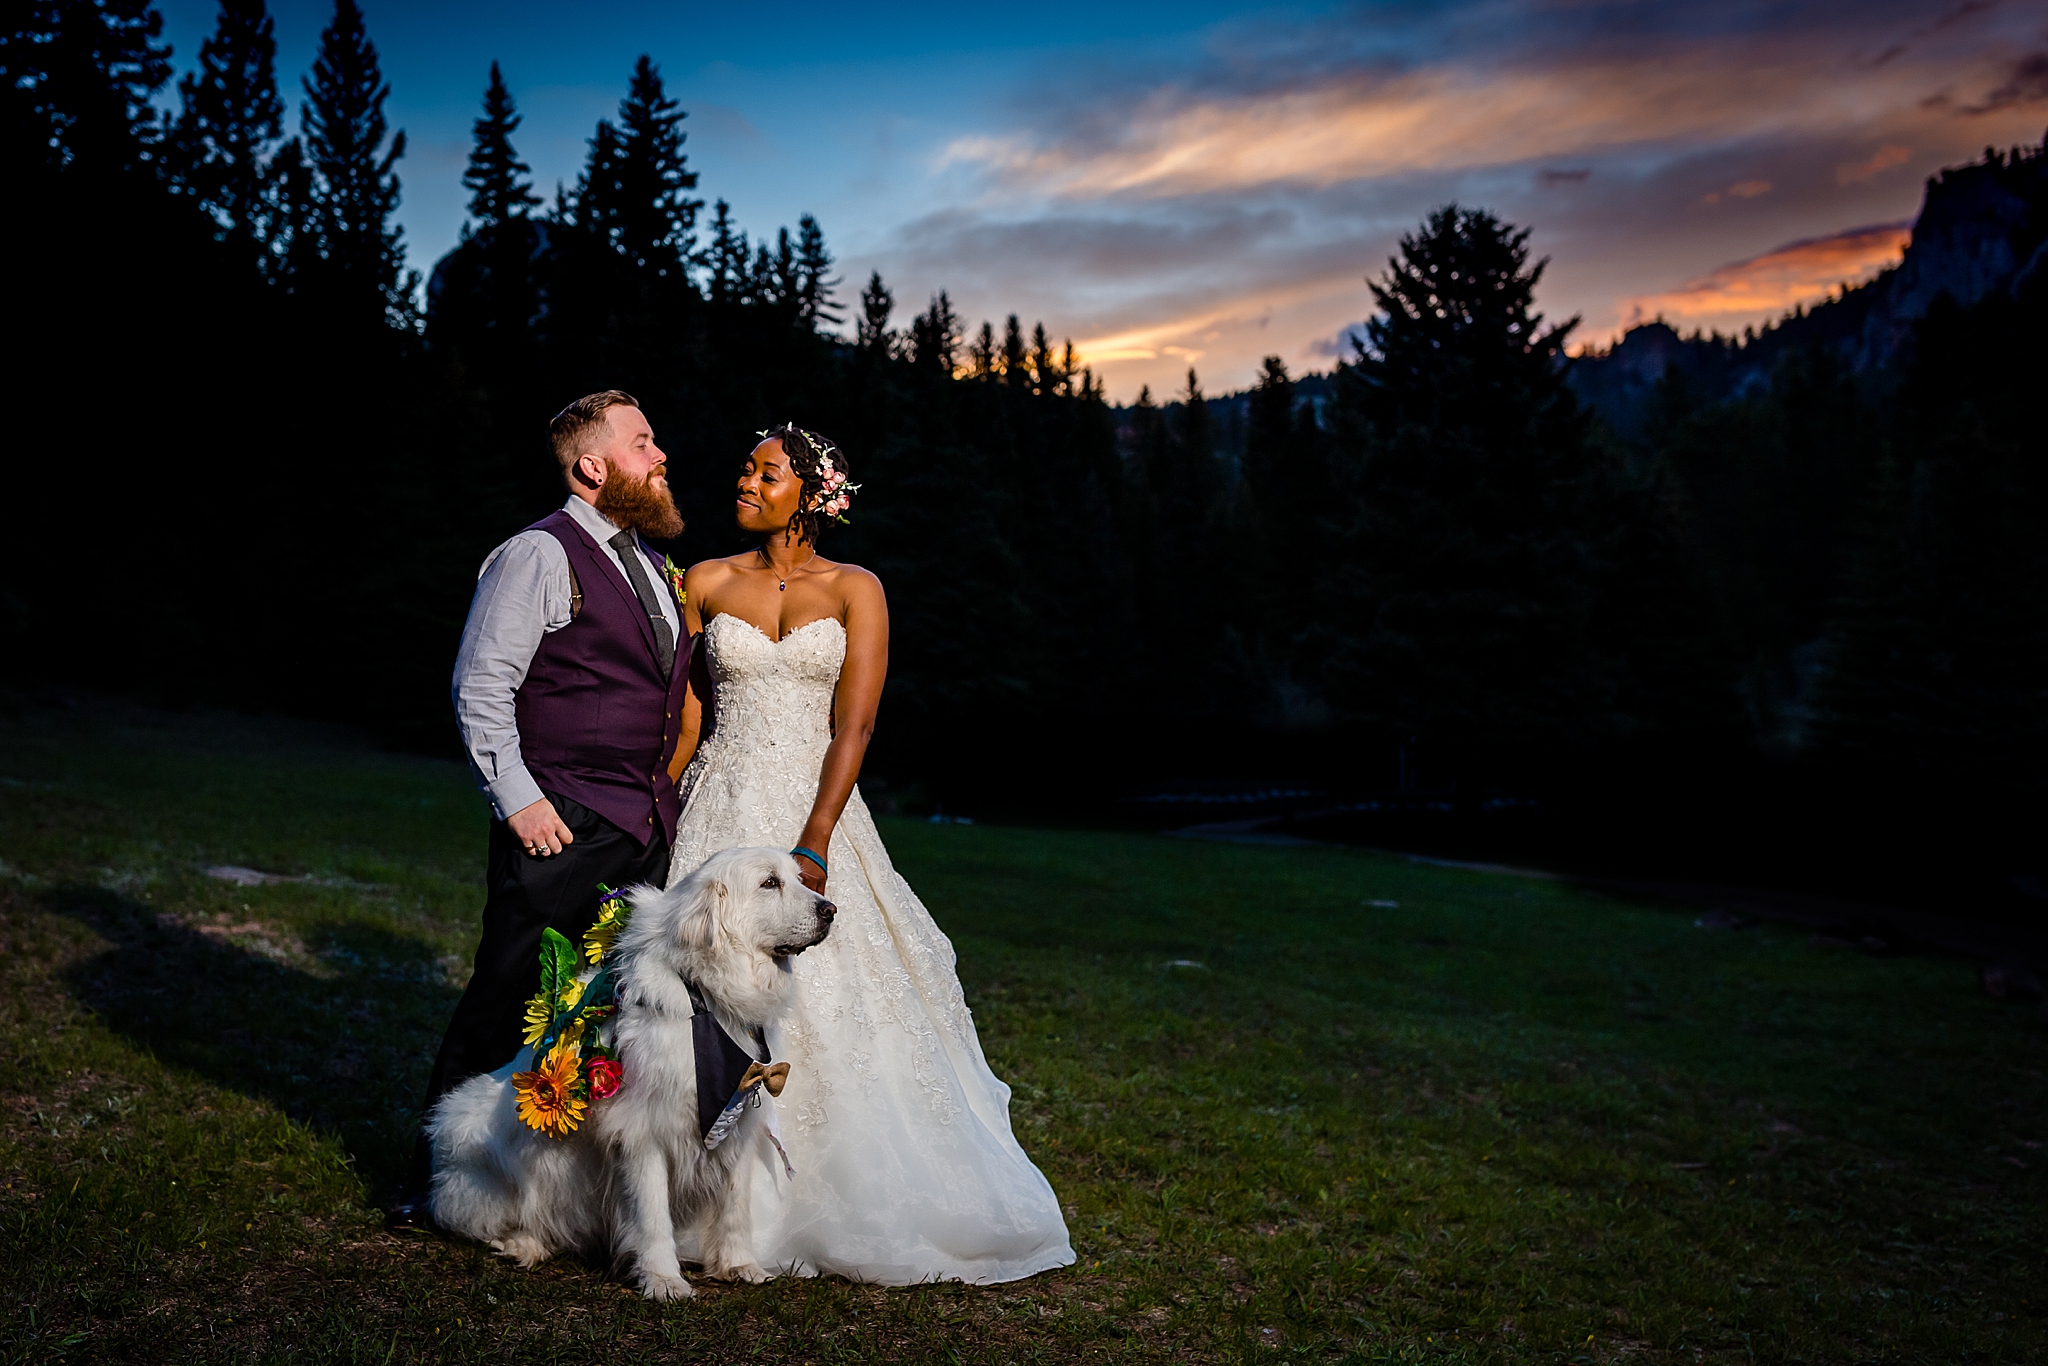 Bride, Groom and their Best Dog during a colorful Colorado Sunset. Latrice & Drew’s Mountain Wedding at Wedgewood Mountain View Ranch by Colorado Wedding Photographer, Jennifer Garza. Sunset Photos, Wedding Sunset Photos, Colorado Wedding Photographer, Colorado Wedding Photography, Colorado Mountain Wedding Photographer, Colorado Mountain Wedding, Mountain Wedding Photographer, Wedgewood Weddings, Wedgewood Weddings Mountain View Ranch, Dogs At Weddings, Wedding Dogs, Dog Wedding, Colorado Bride